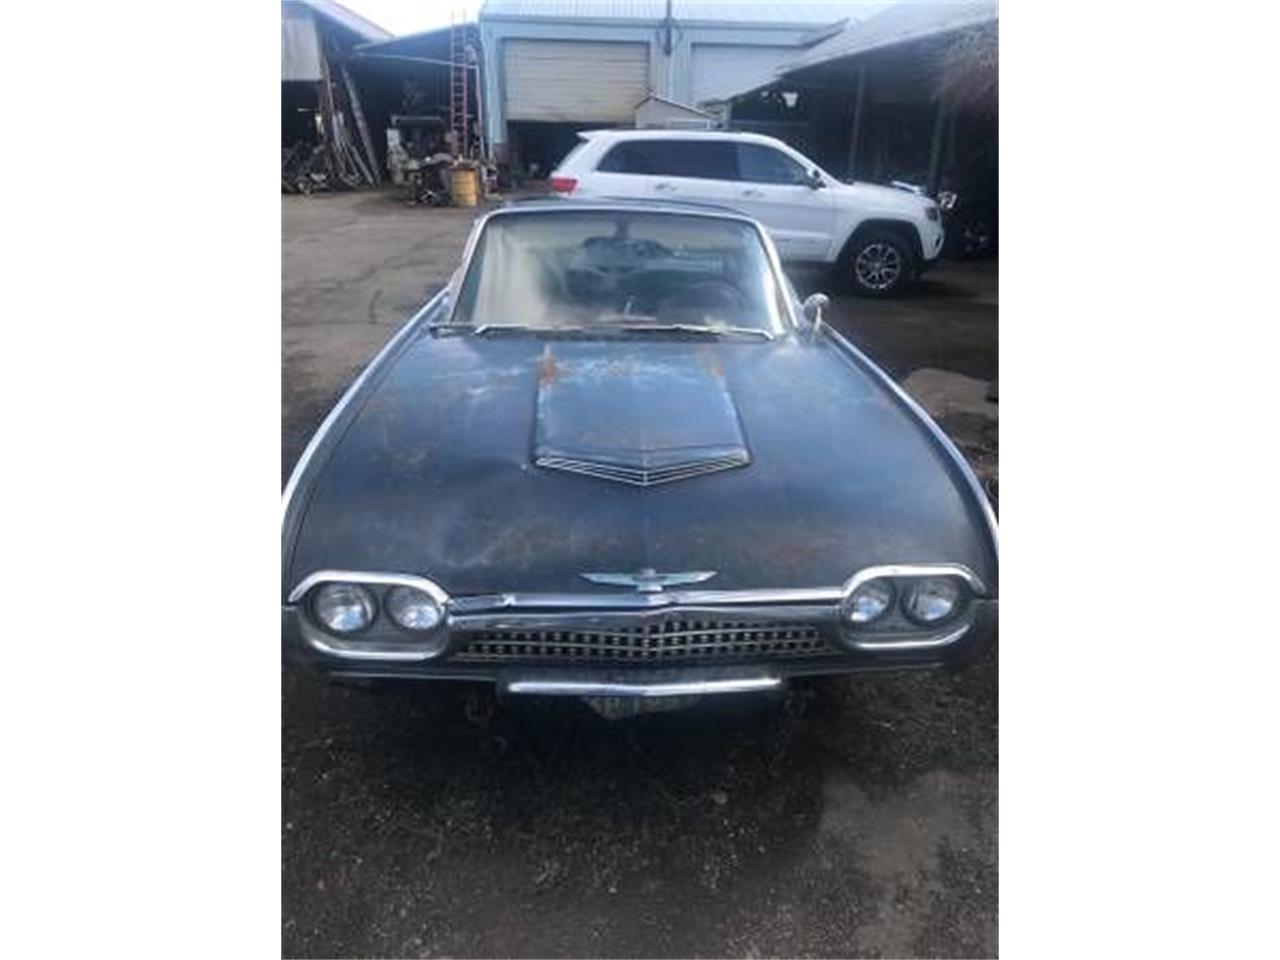 1962 Ford Thunderbird for sale in Cadillac, MI